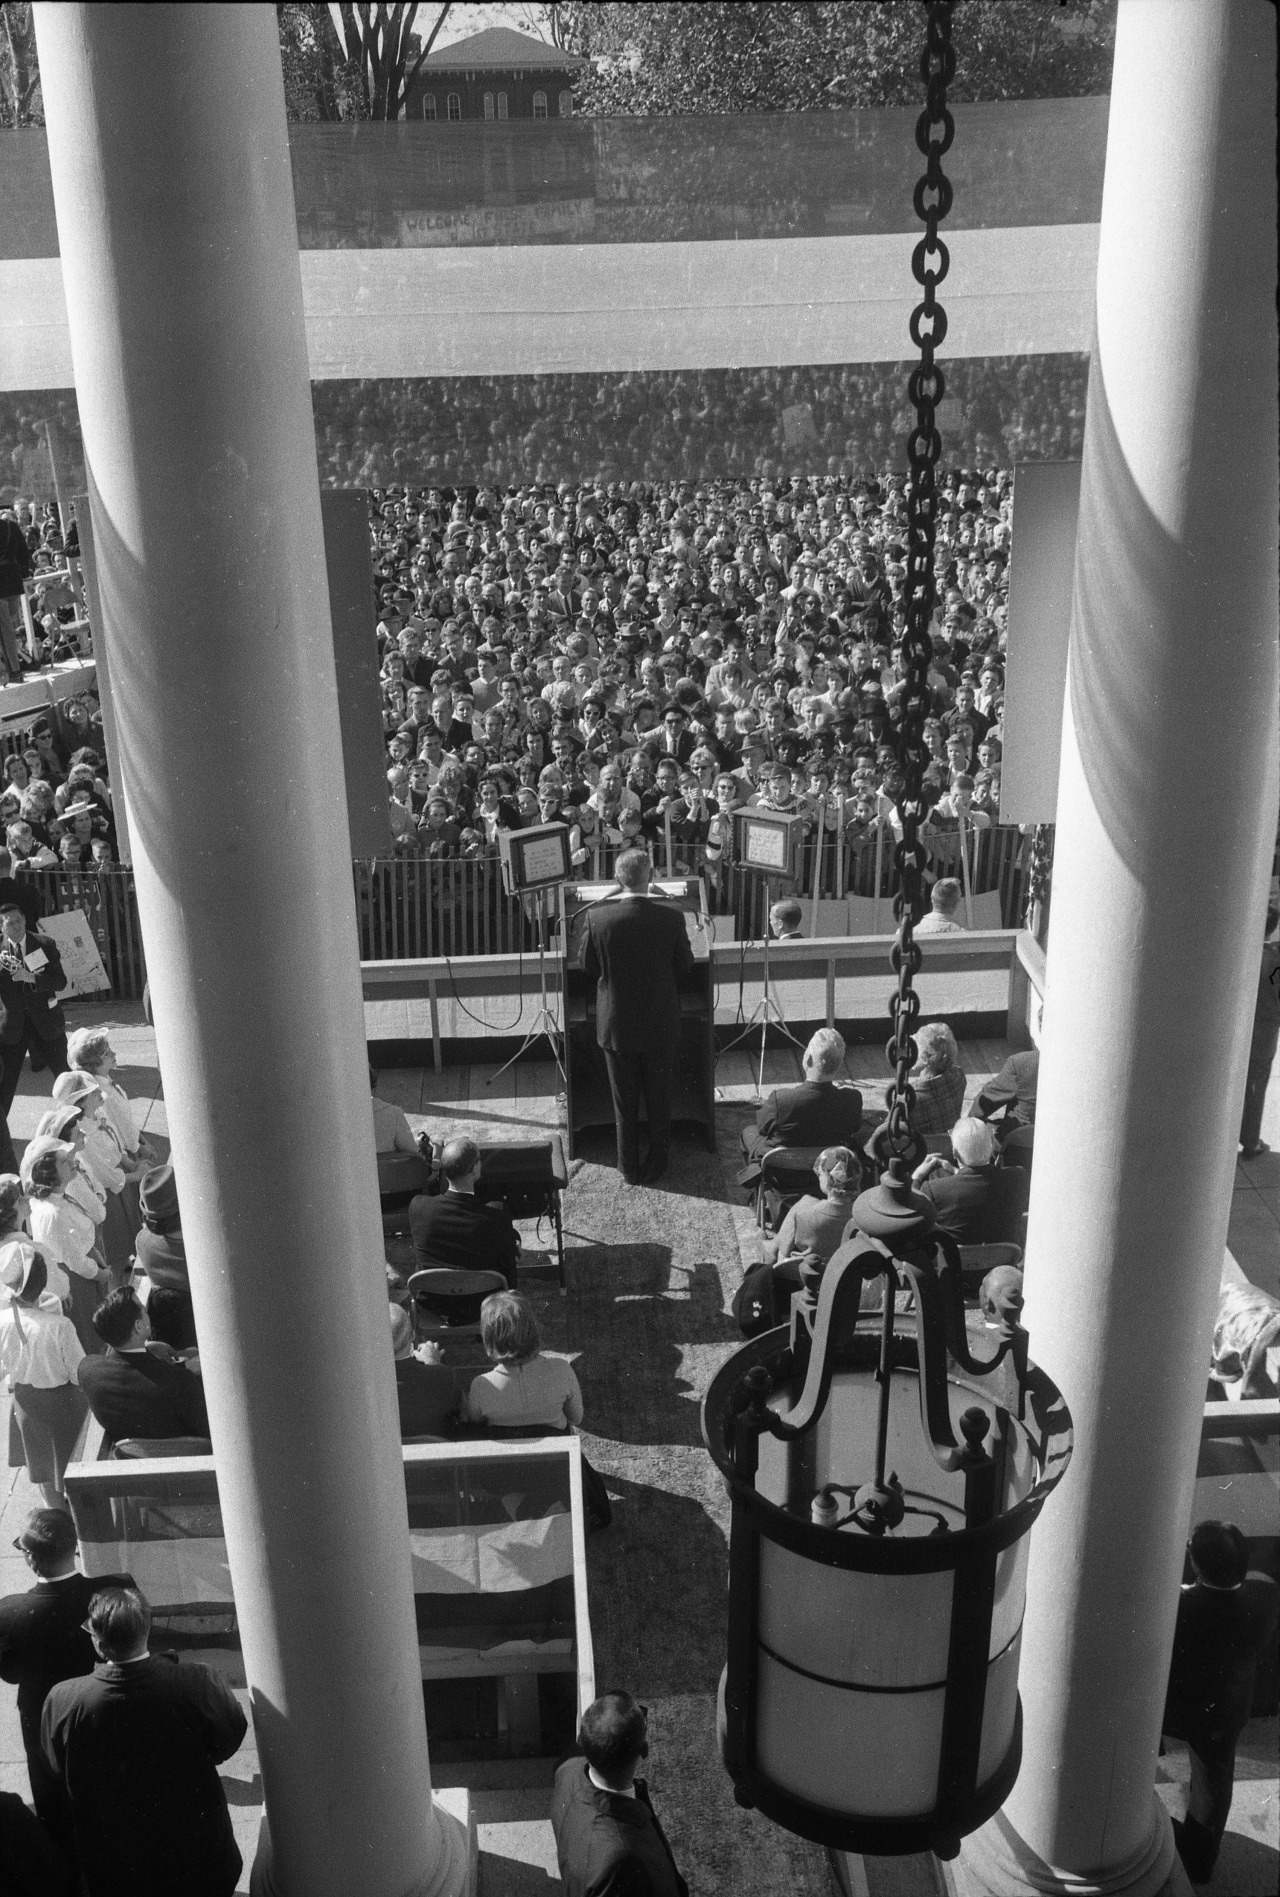 October 31, 1964. Today LBJ’s campaign goes through Dover, Wilmington, and Farmingdale, Long Island. The President ends the day of campaigning with a rally at Madison Square Gardens with Luci, Lynda, Mrs. Johnson, and Mrs. and Mrs. Robert Kennedy....